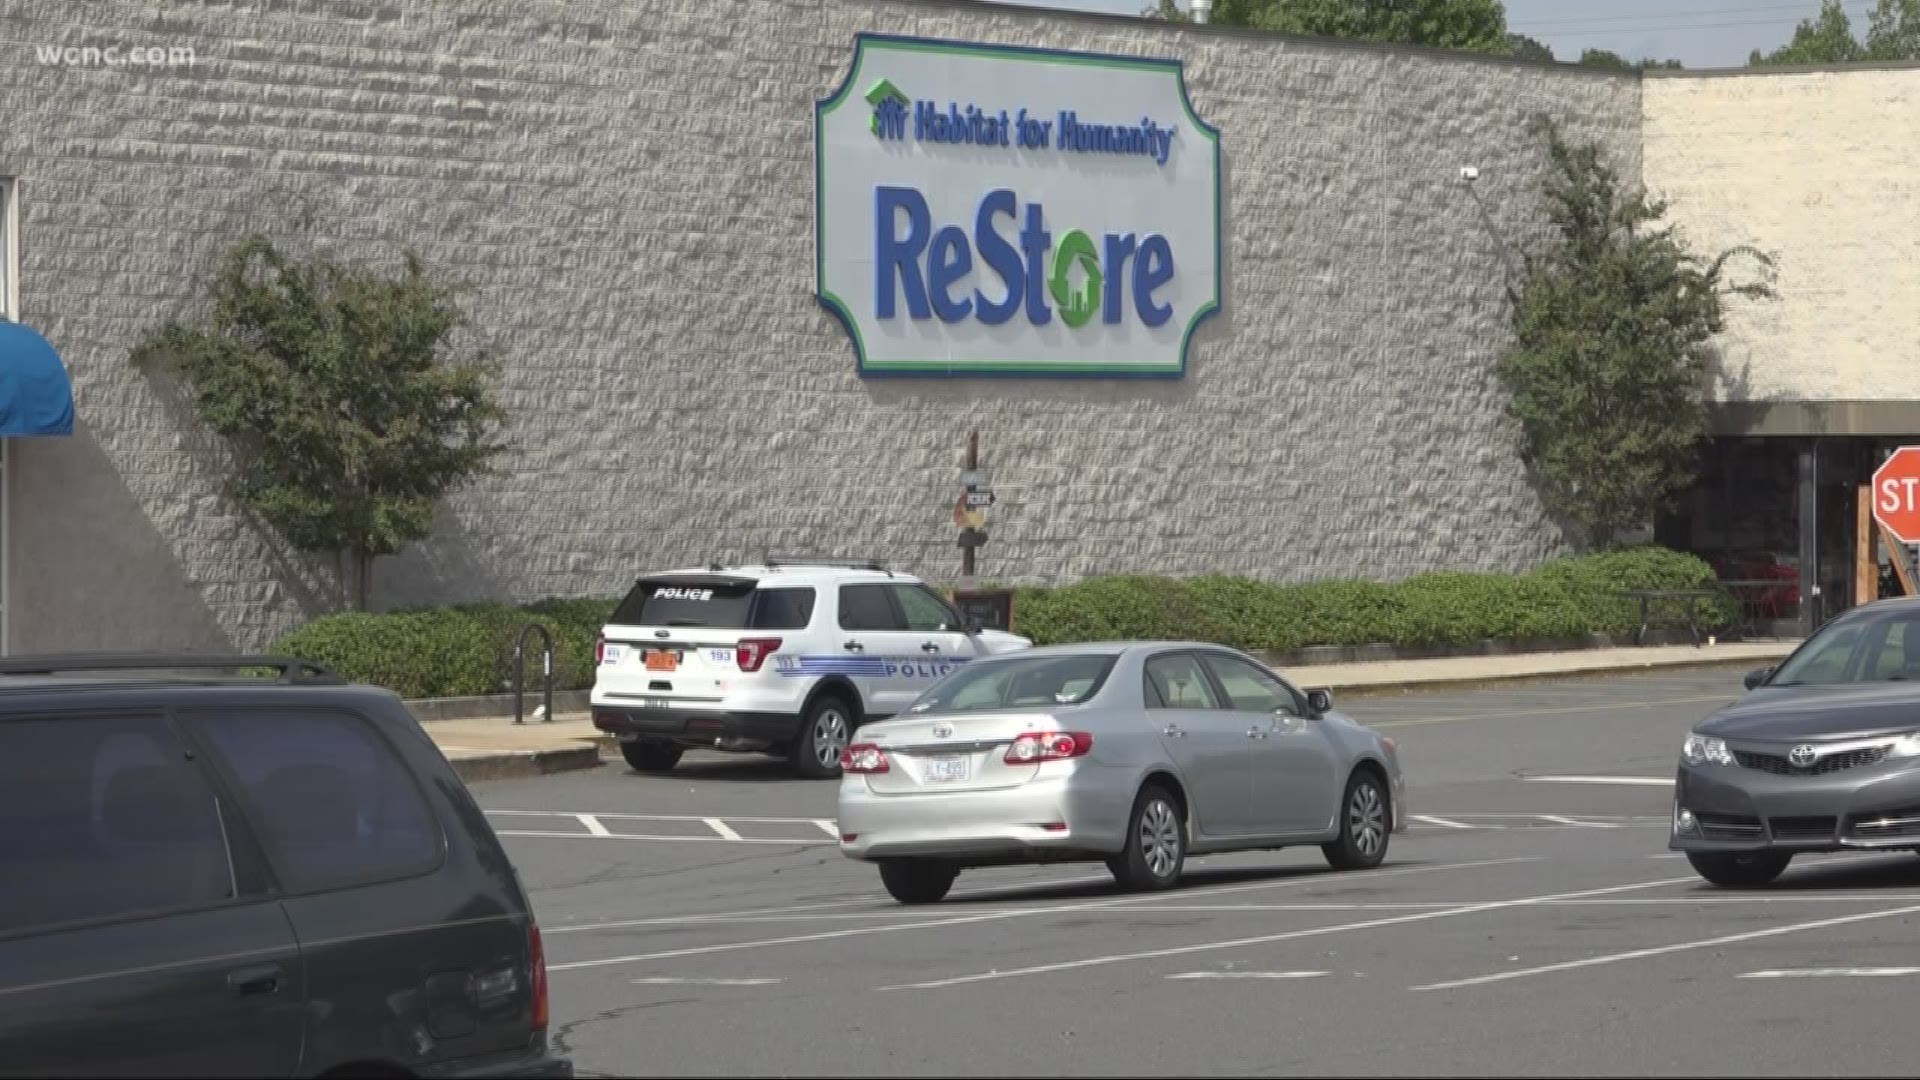 A man was shot outside a Habitat for Humanity ReStore in southeast Charlotte in what police are calling a drive-by shooting.